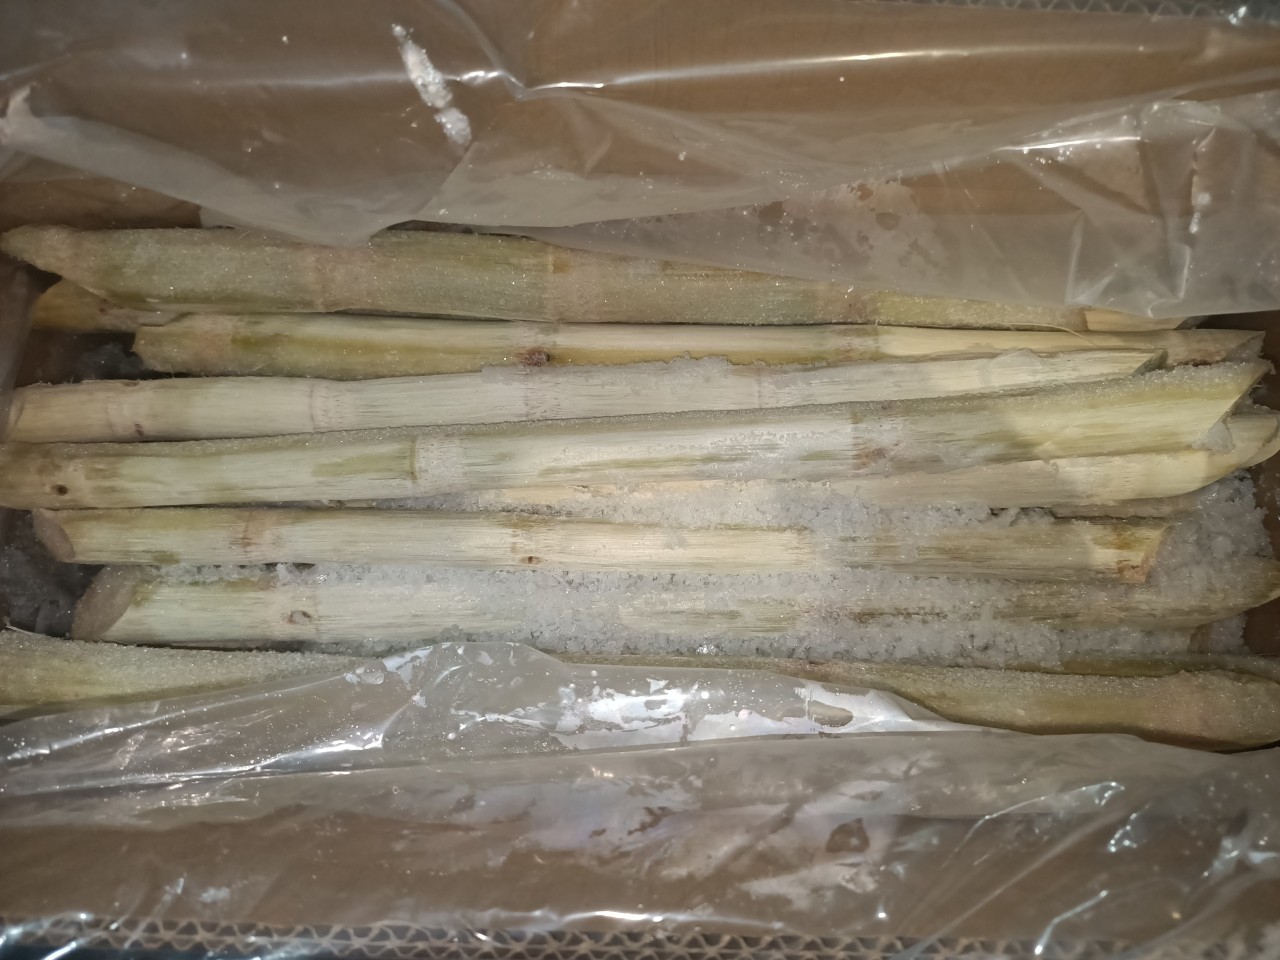 Tan Gia Thanh's frozen sugar cane for export